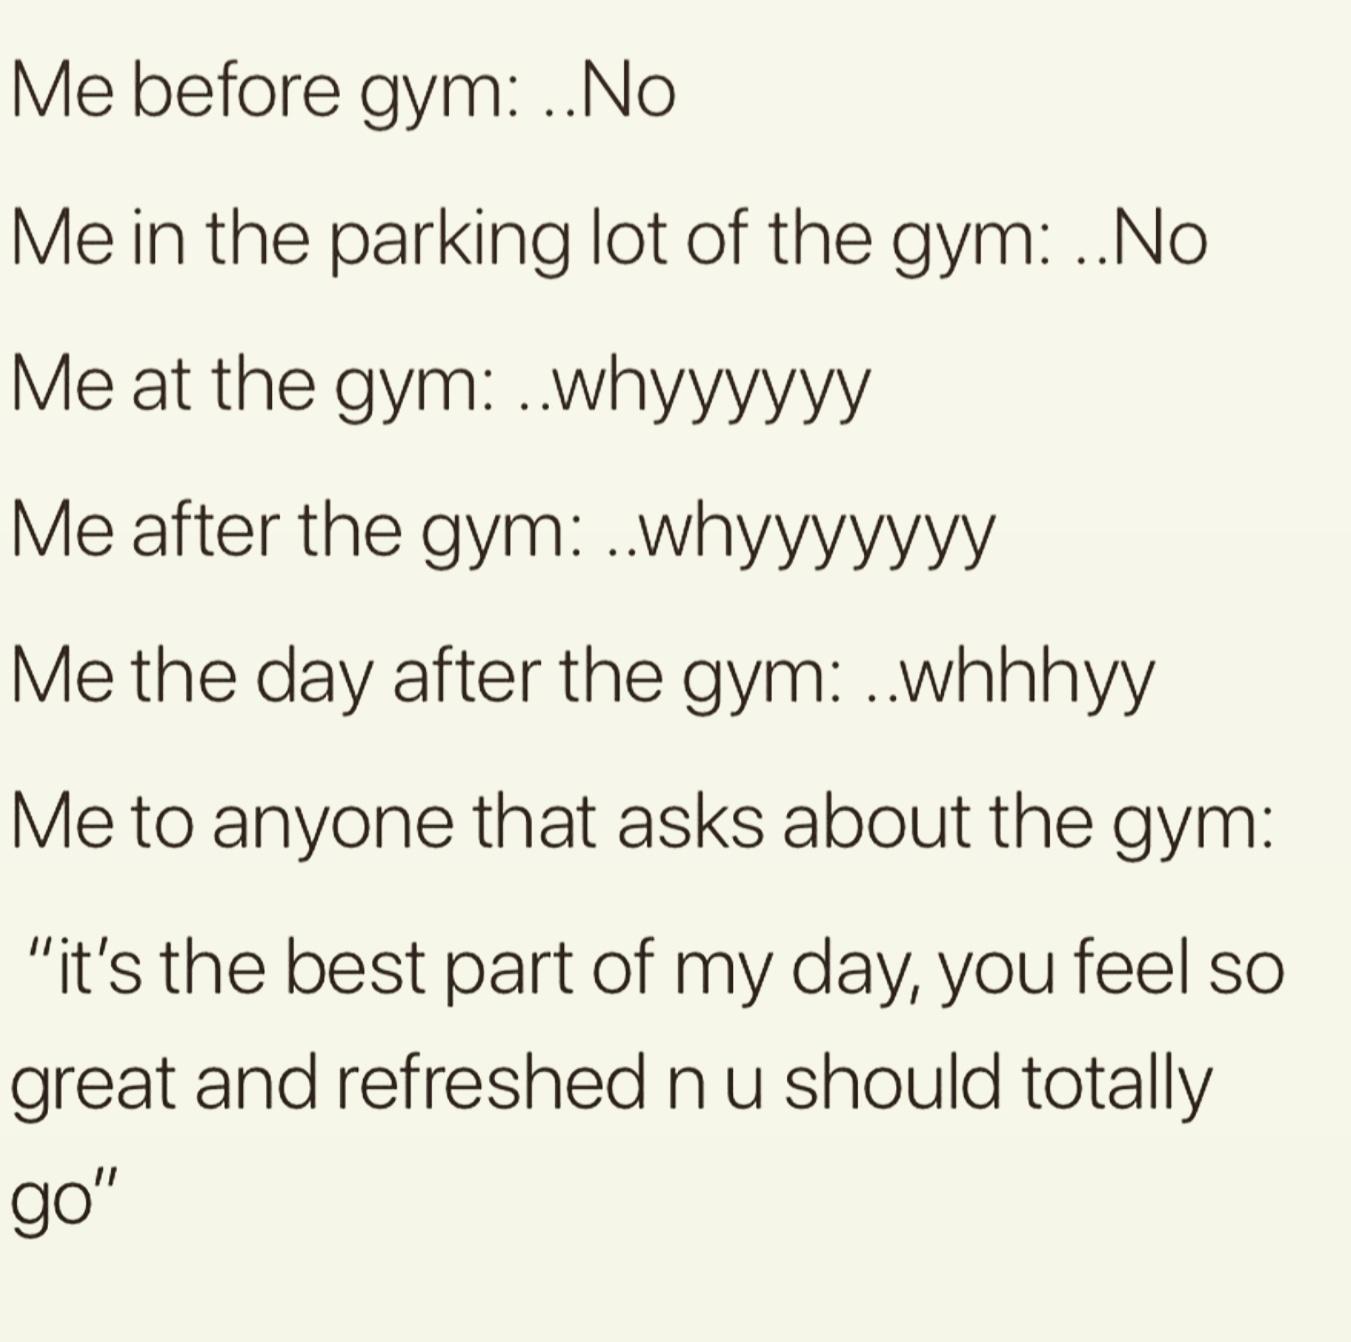 copyright statement - Me before gym ..No Me in the parking lot of the gym .. No Me at the gym ..whyyyyyy Me after the gym ..whyyyyyyy Me the day after the gym ..whhhyy Me to anyone that asks about the gym "it's the best part of my day, you feel so great a